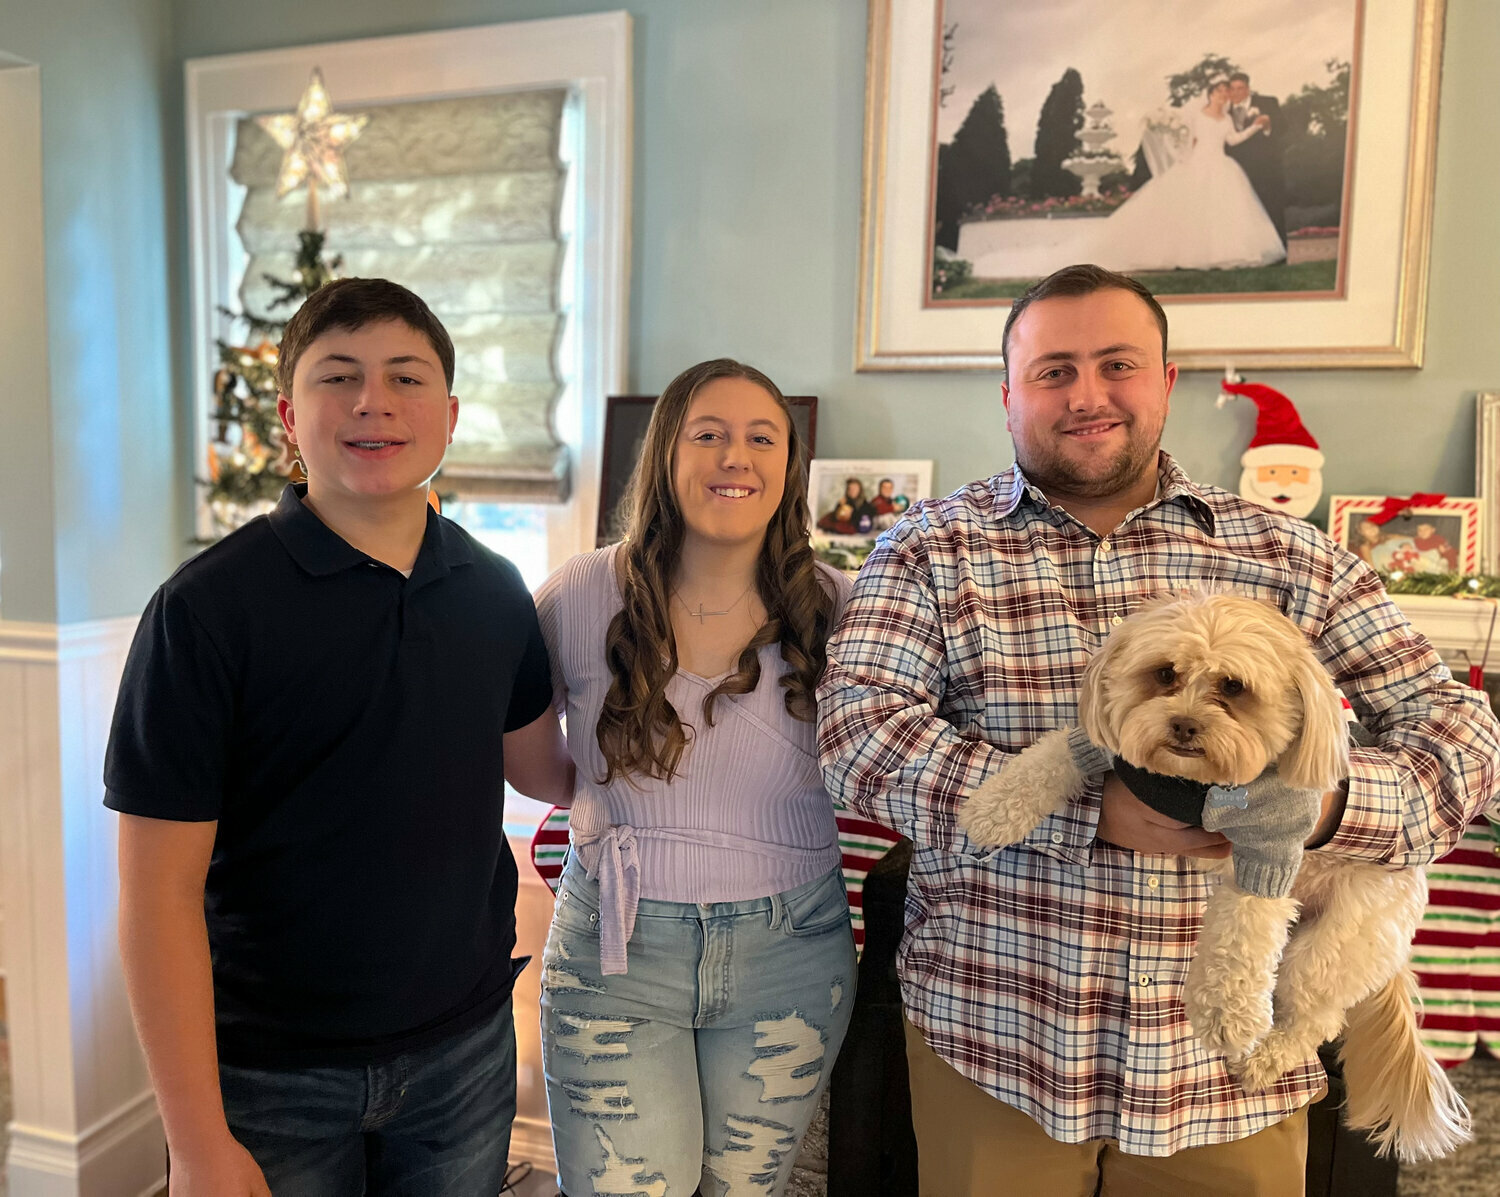 Winston the dog with her adopted family Andrew, 14, Allie, 20, and William, 23